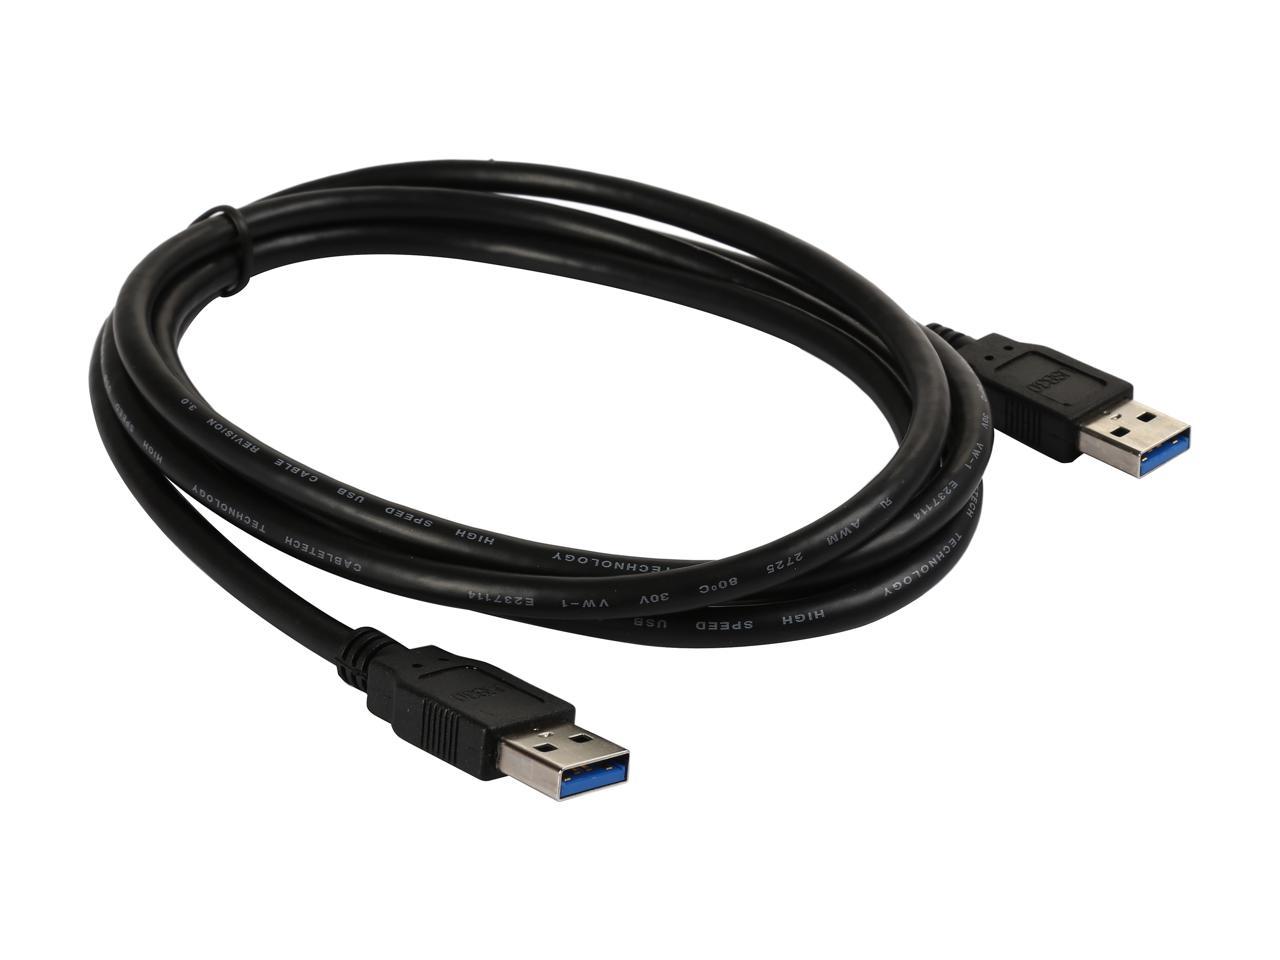 StarTech.com USB3SAA6BK Black Black SuperSpeed USB 3.0 Cable A to A - M/M